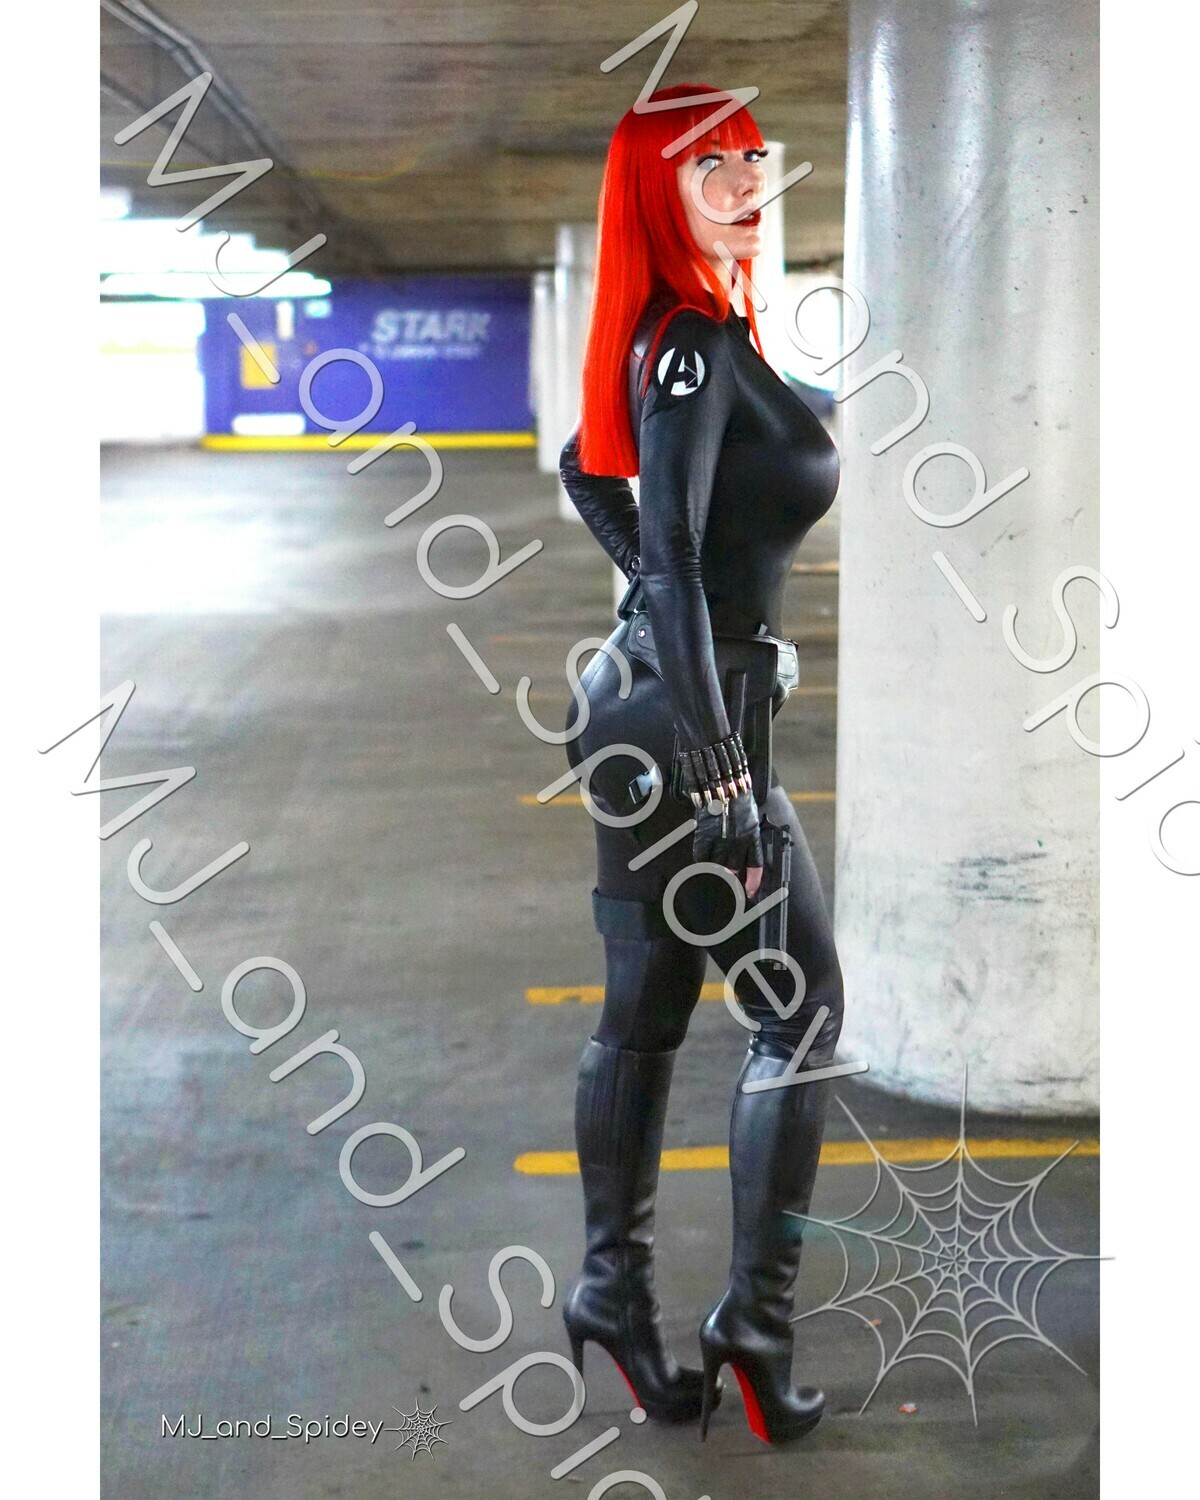 Marvel - Avengers - Black Widow No. 4 - 8x10 Cosplay Print (@MJ_and_Spidey, MJ and Spidey, Comics)